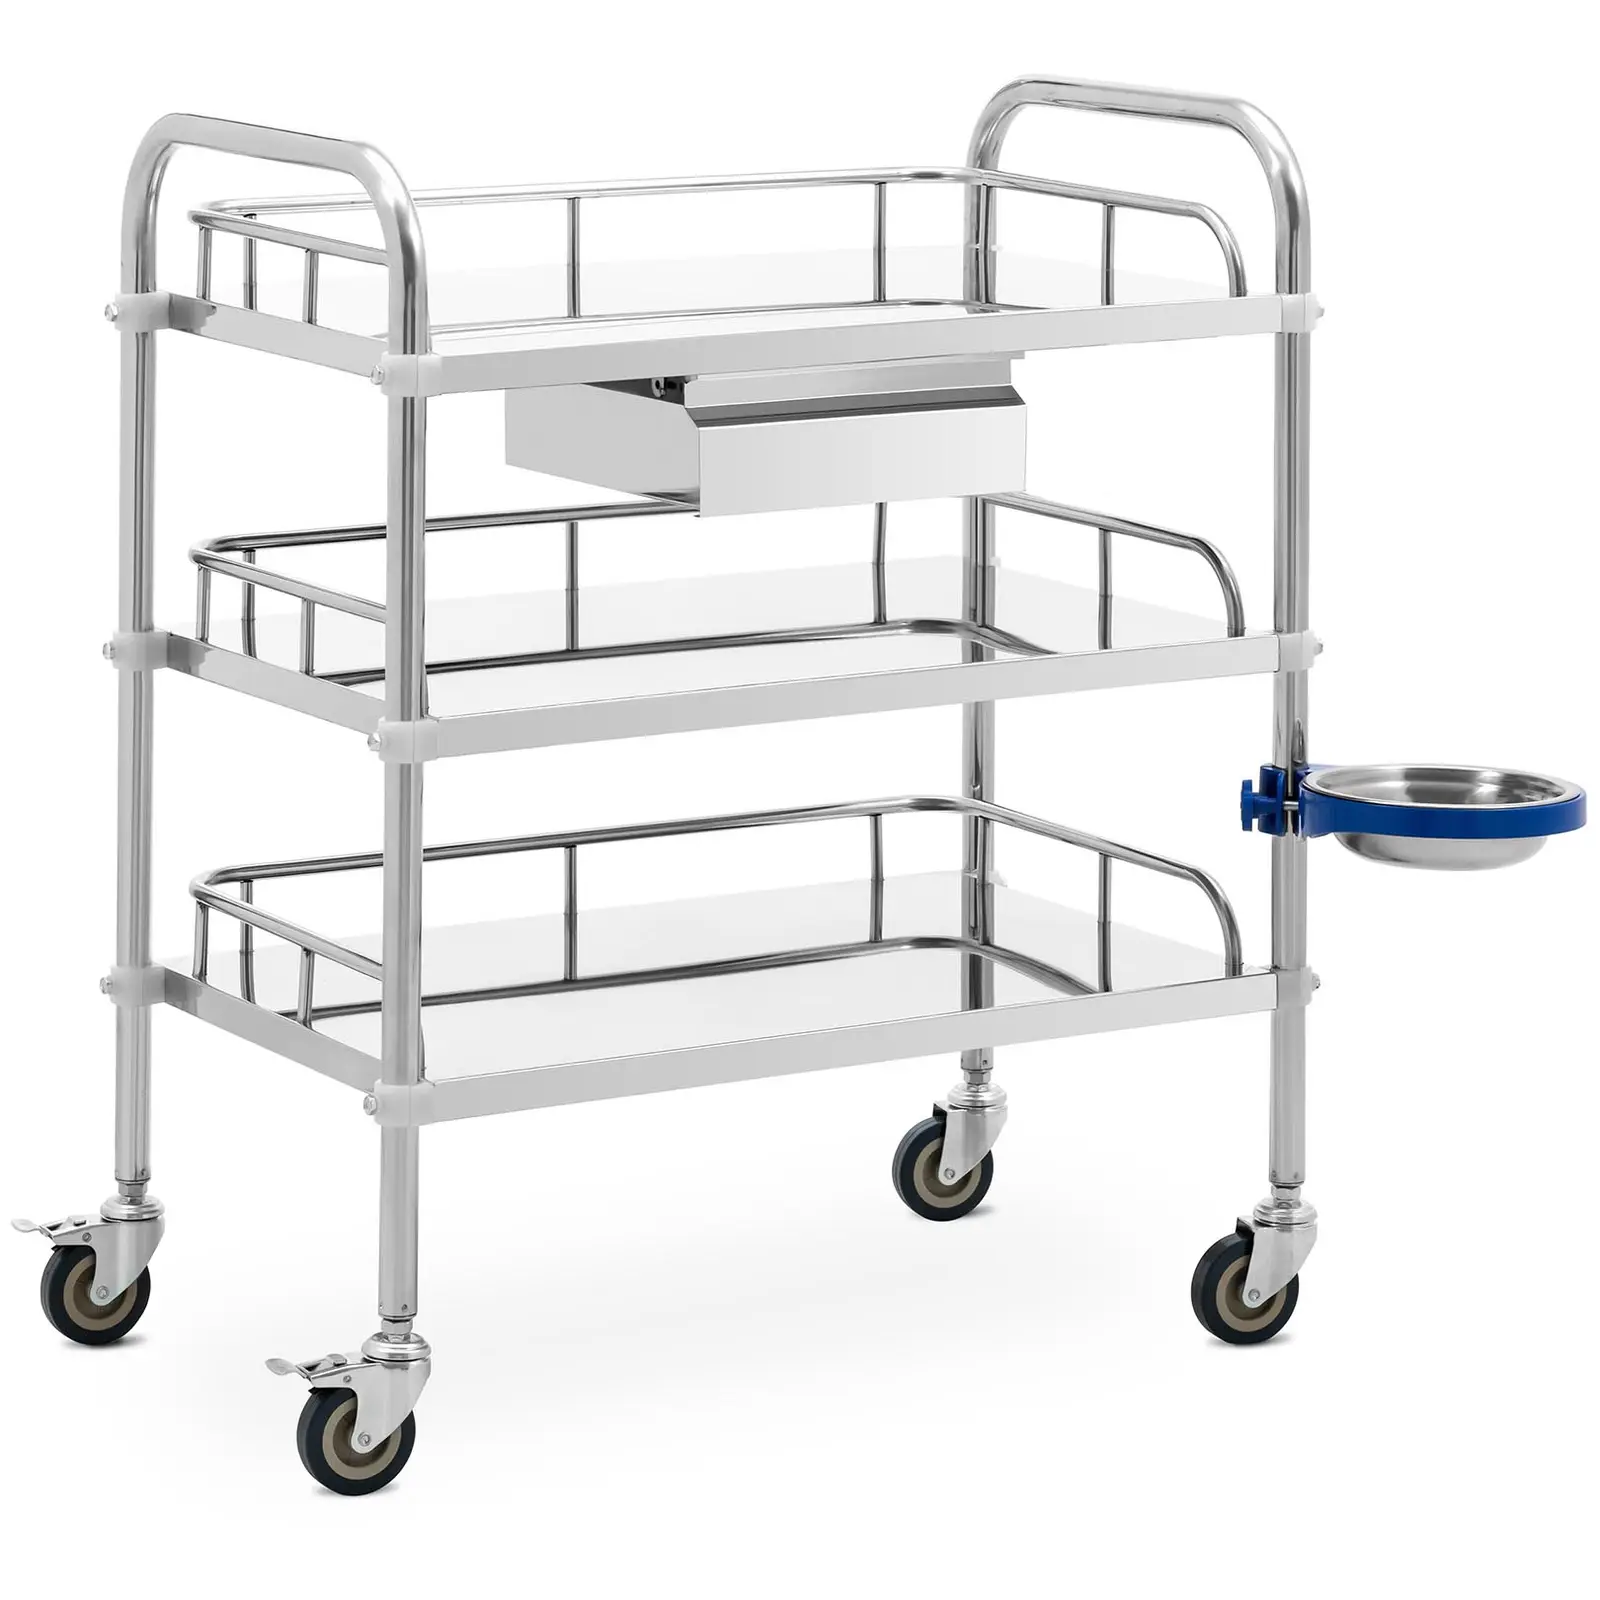 Laboratory Trolley - stainless steel - 3 shelves each 61 x 40 x 13 cm - 1 drawer - 15 kg